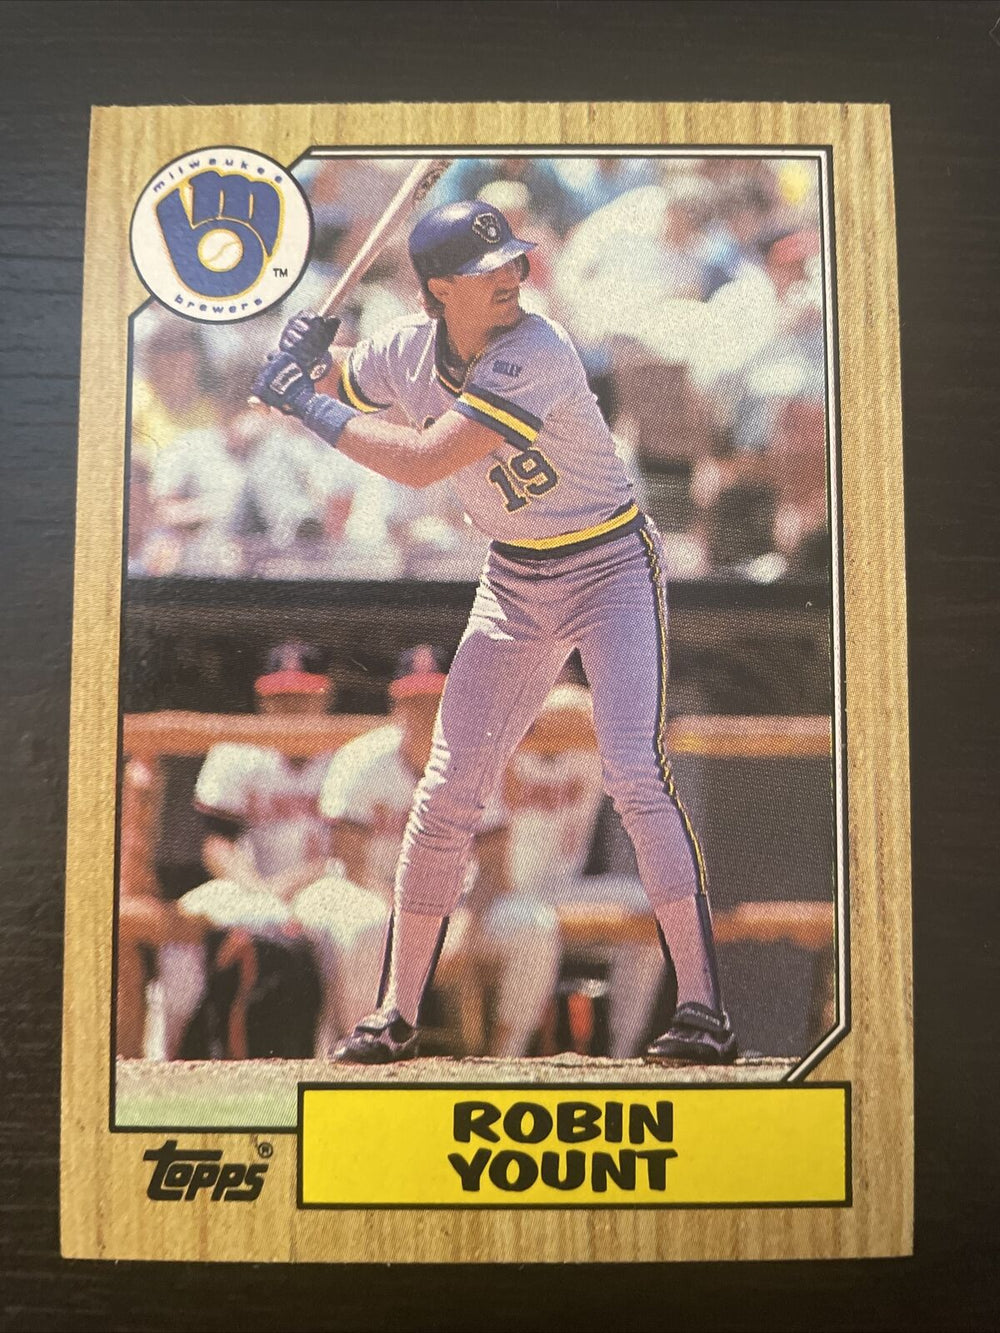 Robin Yount 1987 Topps Series Mint Card #773